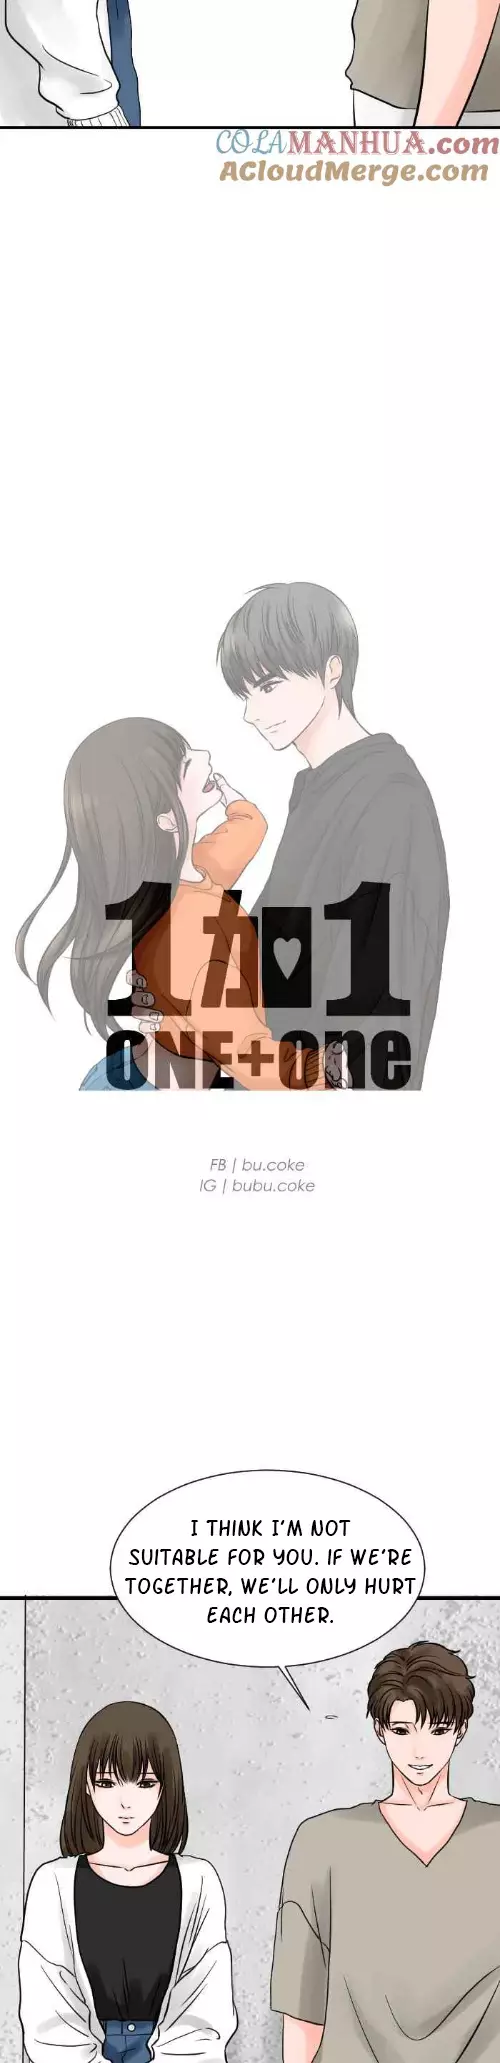 One + One - 64 page 16-bb92d053